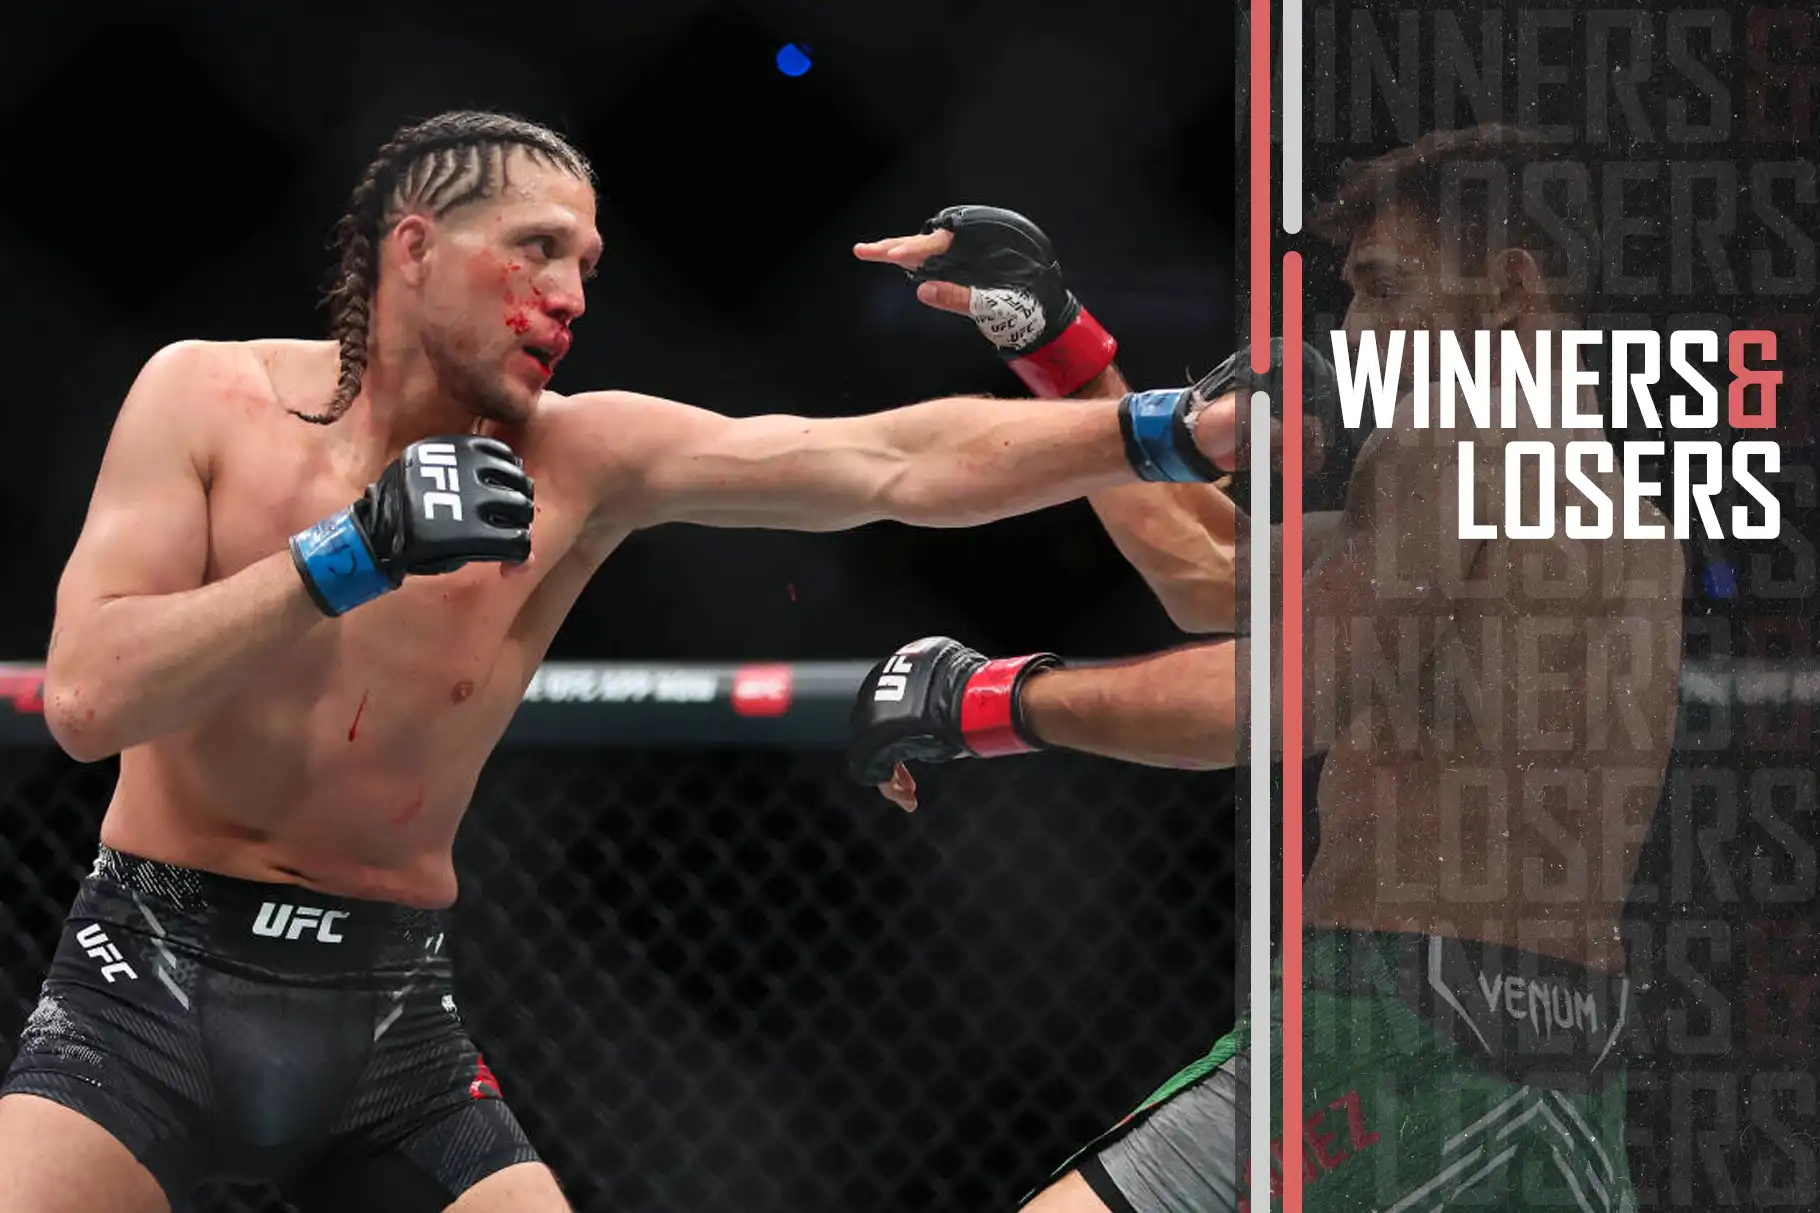 UFC Fight Night: Moreno vs Royval 2 - Winners and Losers